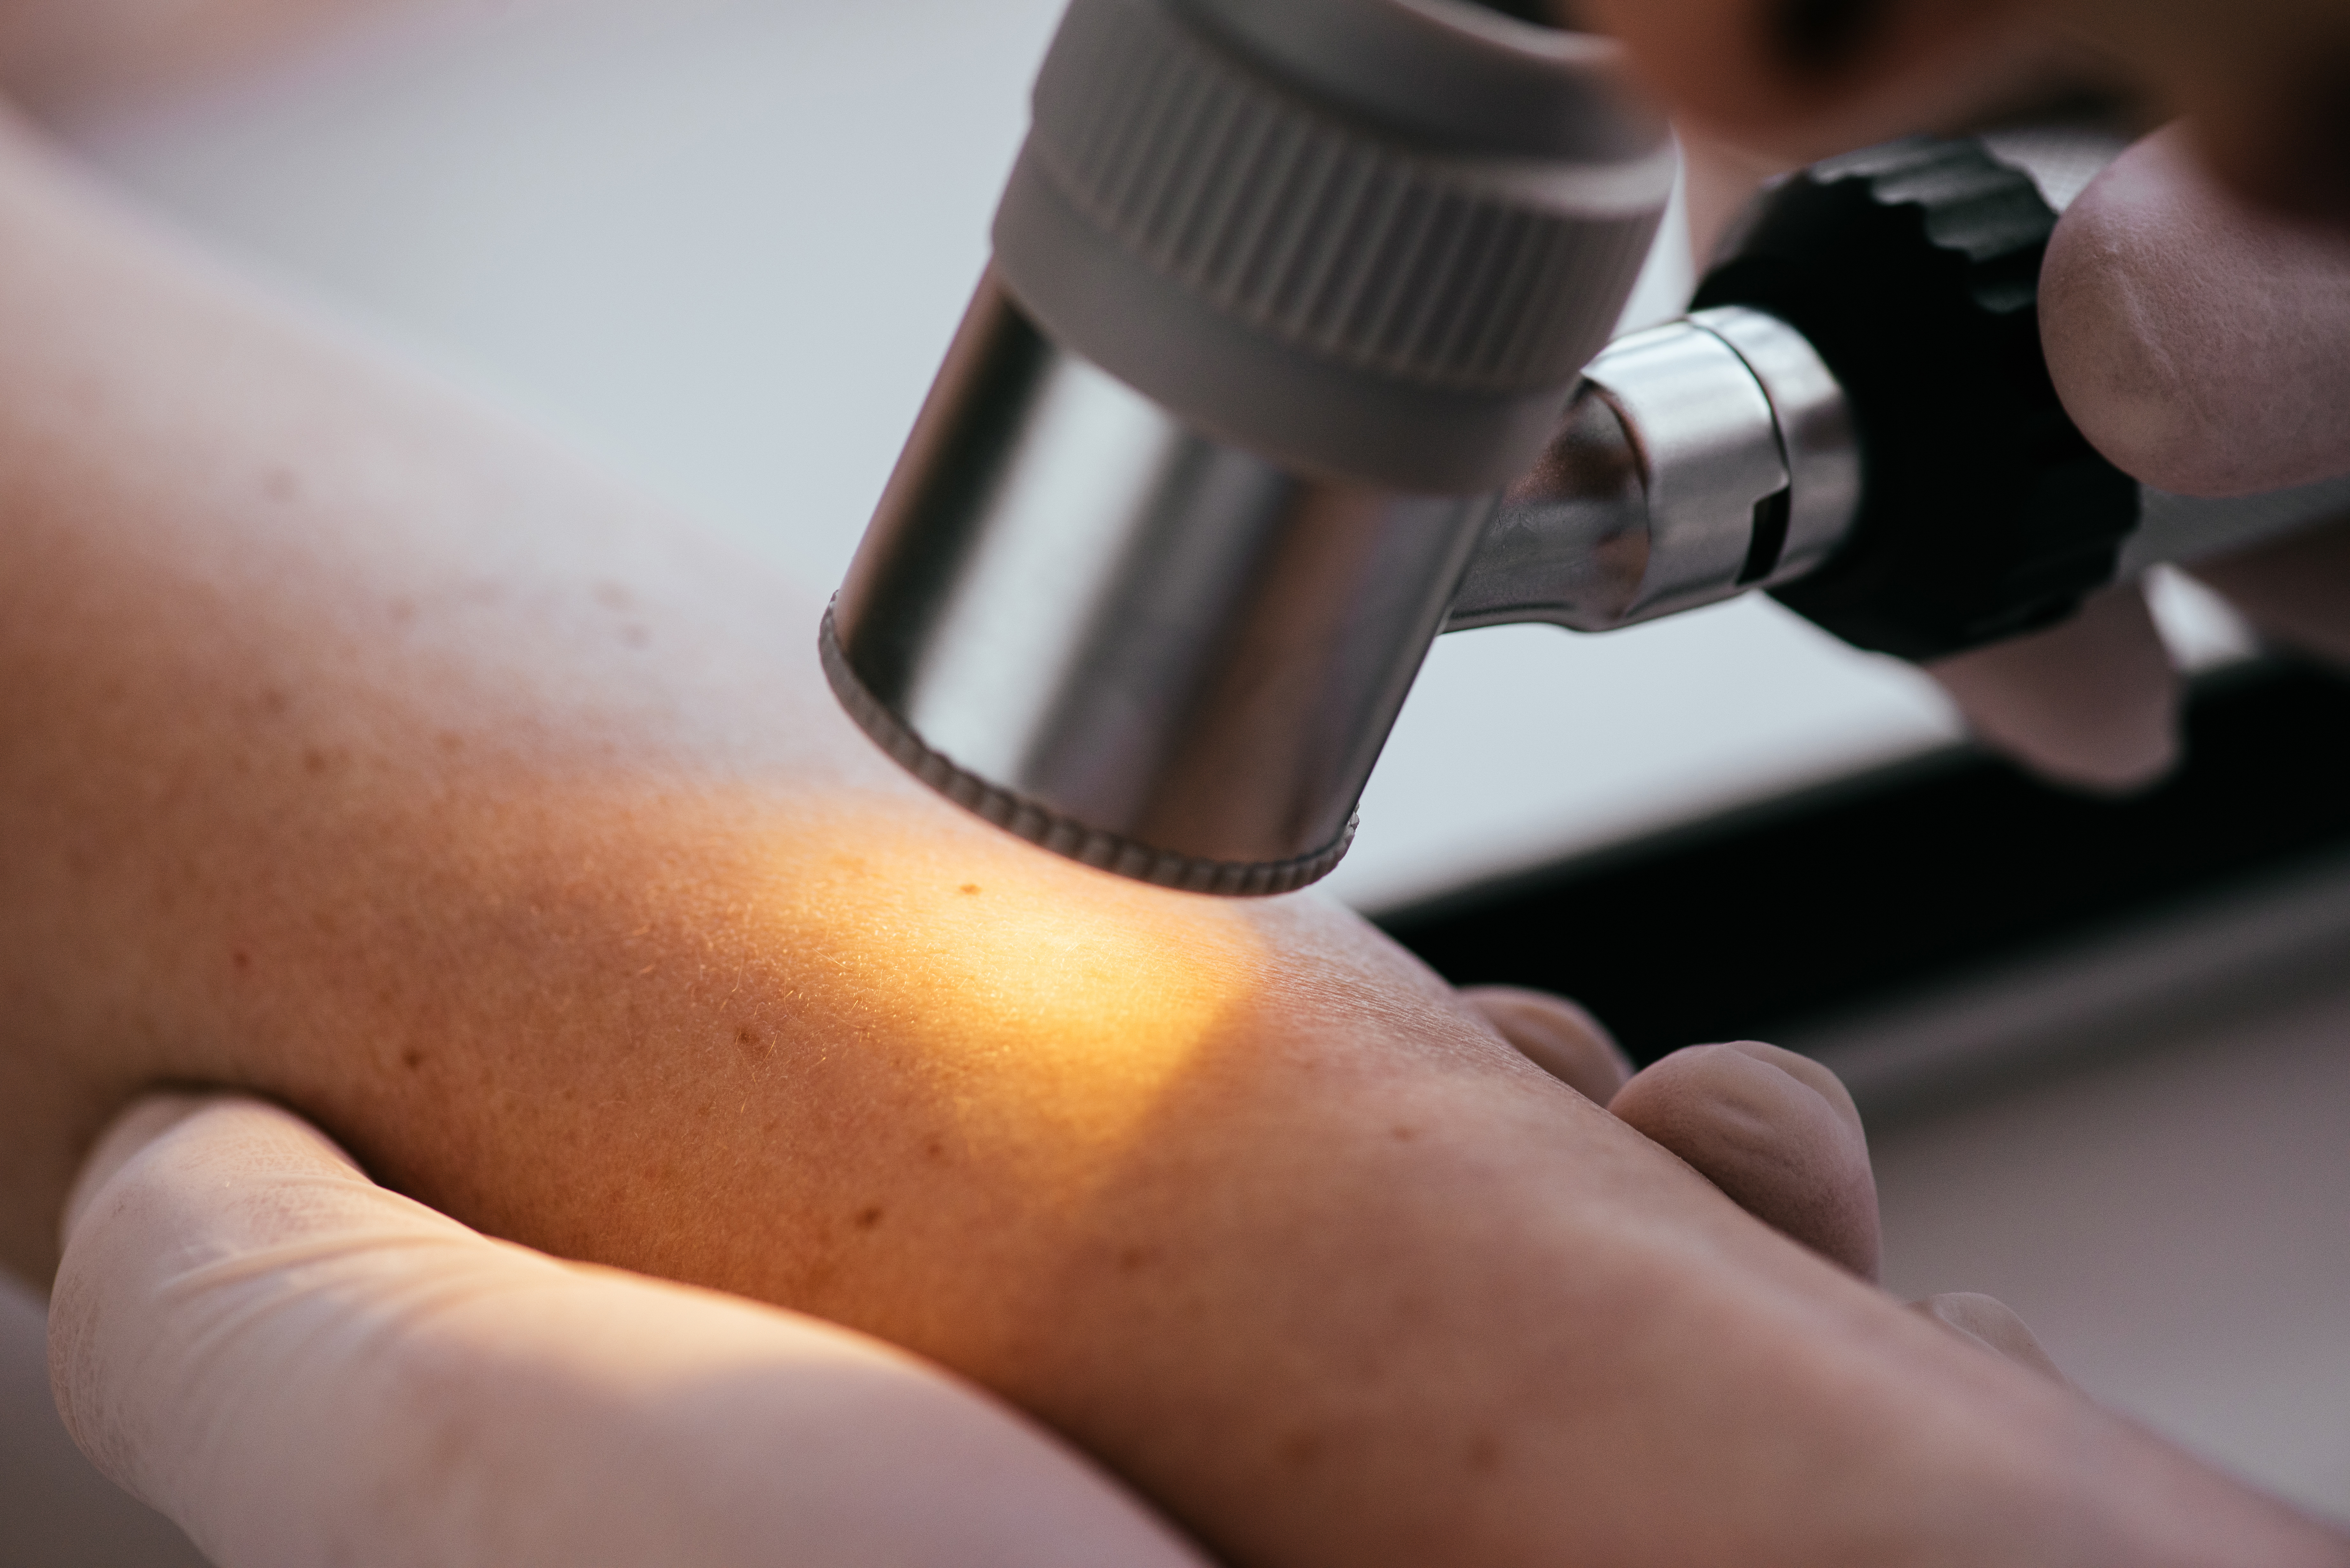 Can a Melanoma Mole Spontaneously Disappear or Regress?